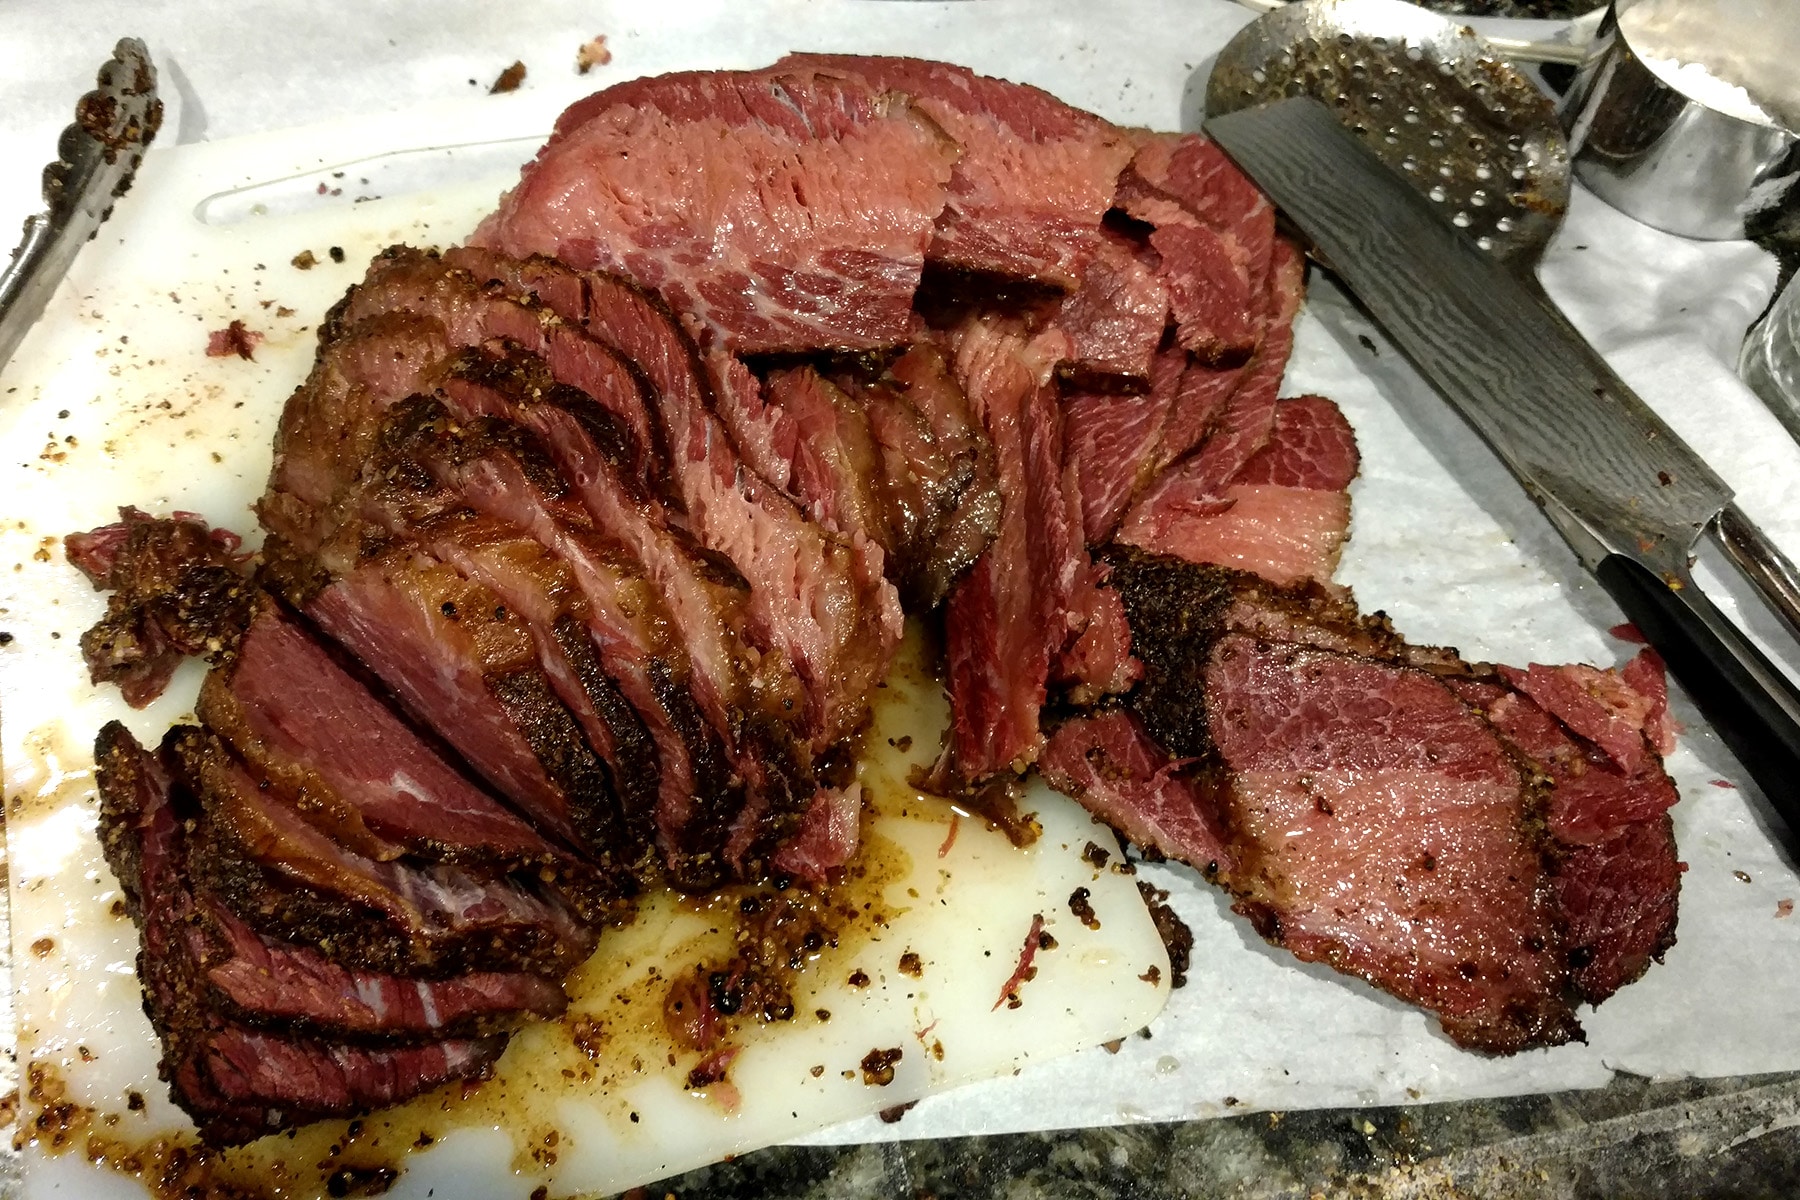 A large chunk of Montreal Smoked Meat, all sliced up on a cutting board.